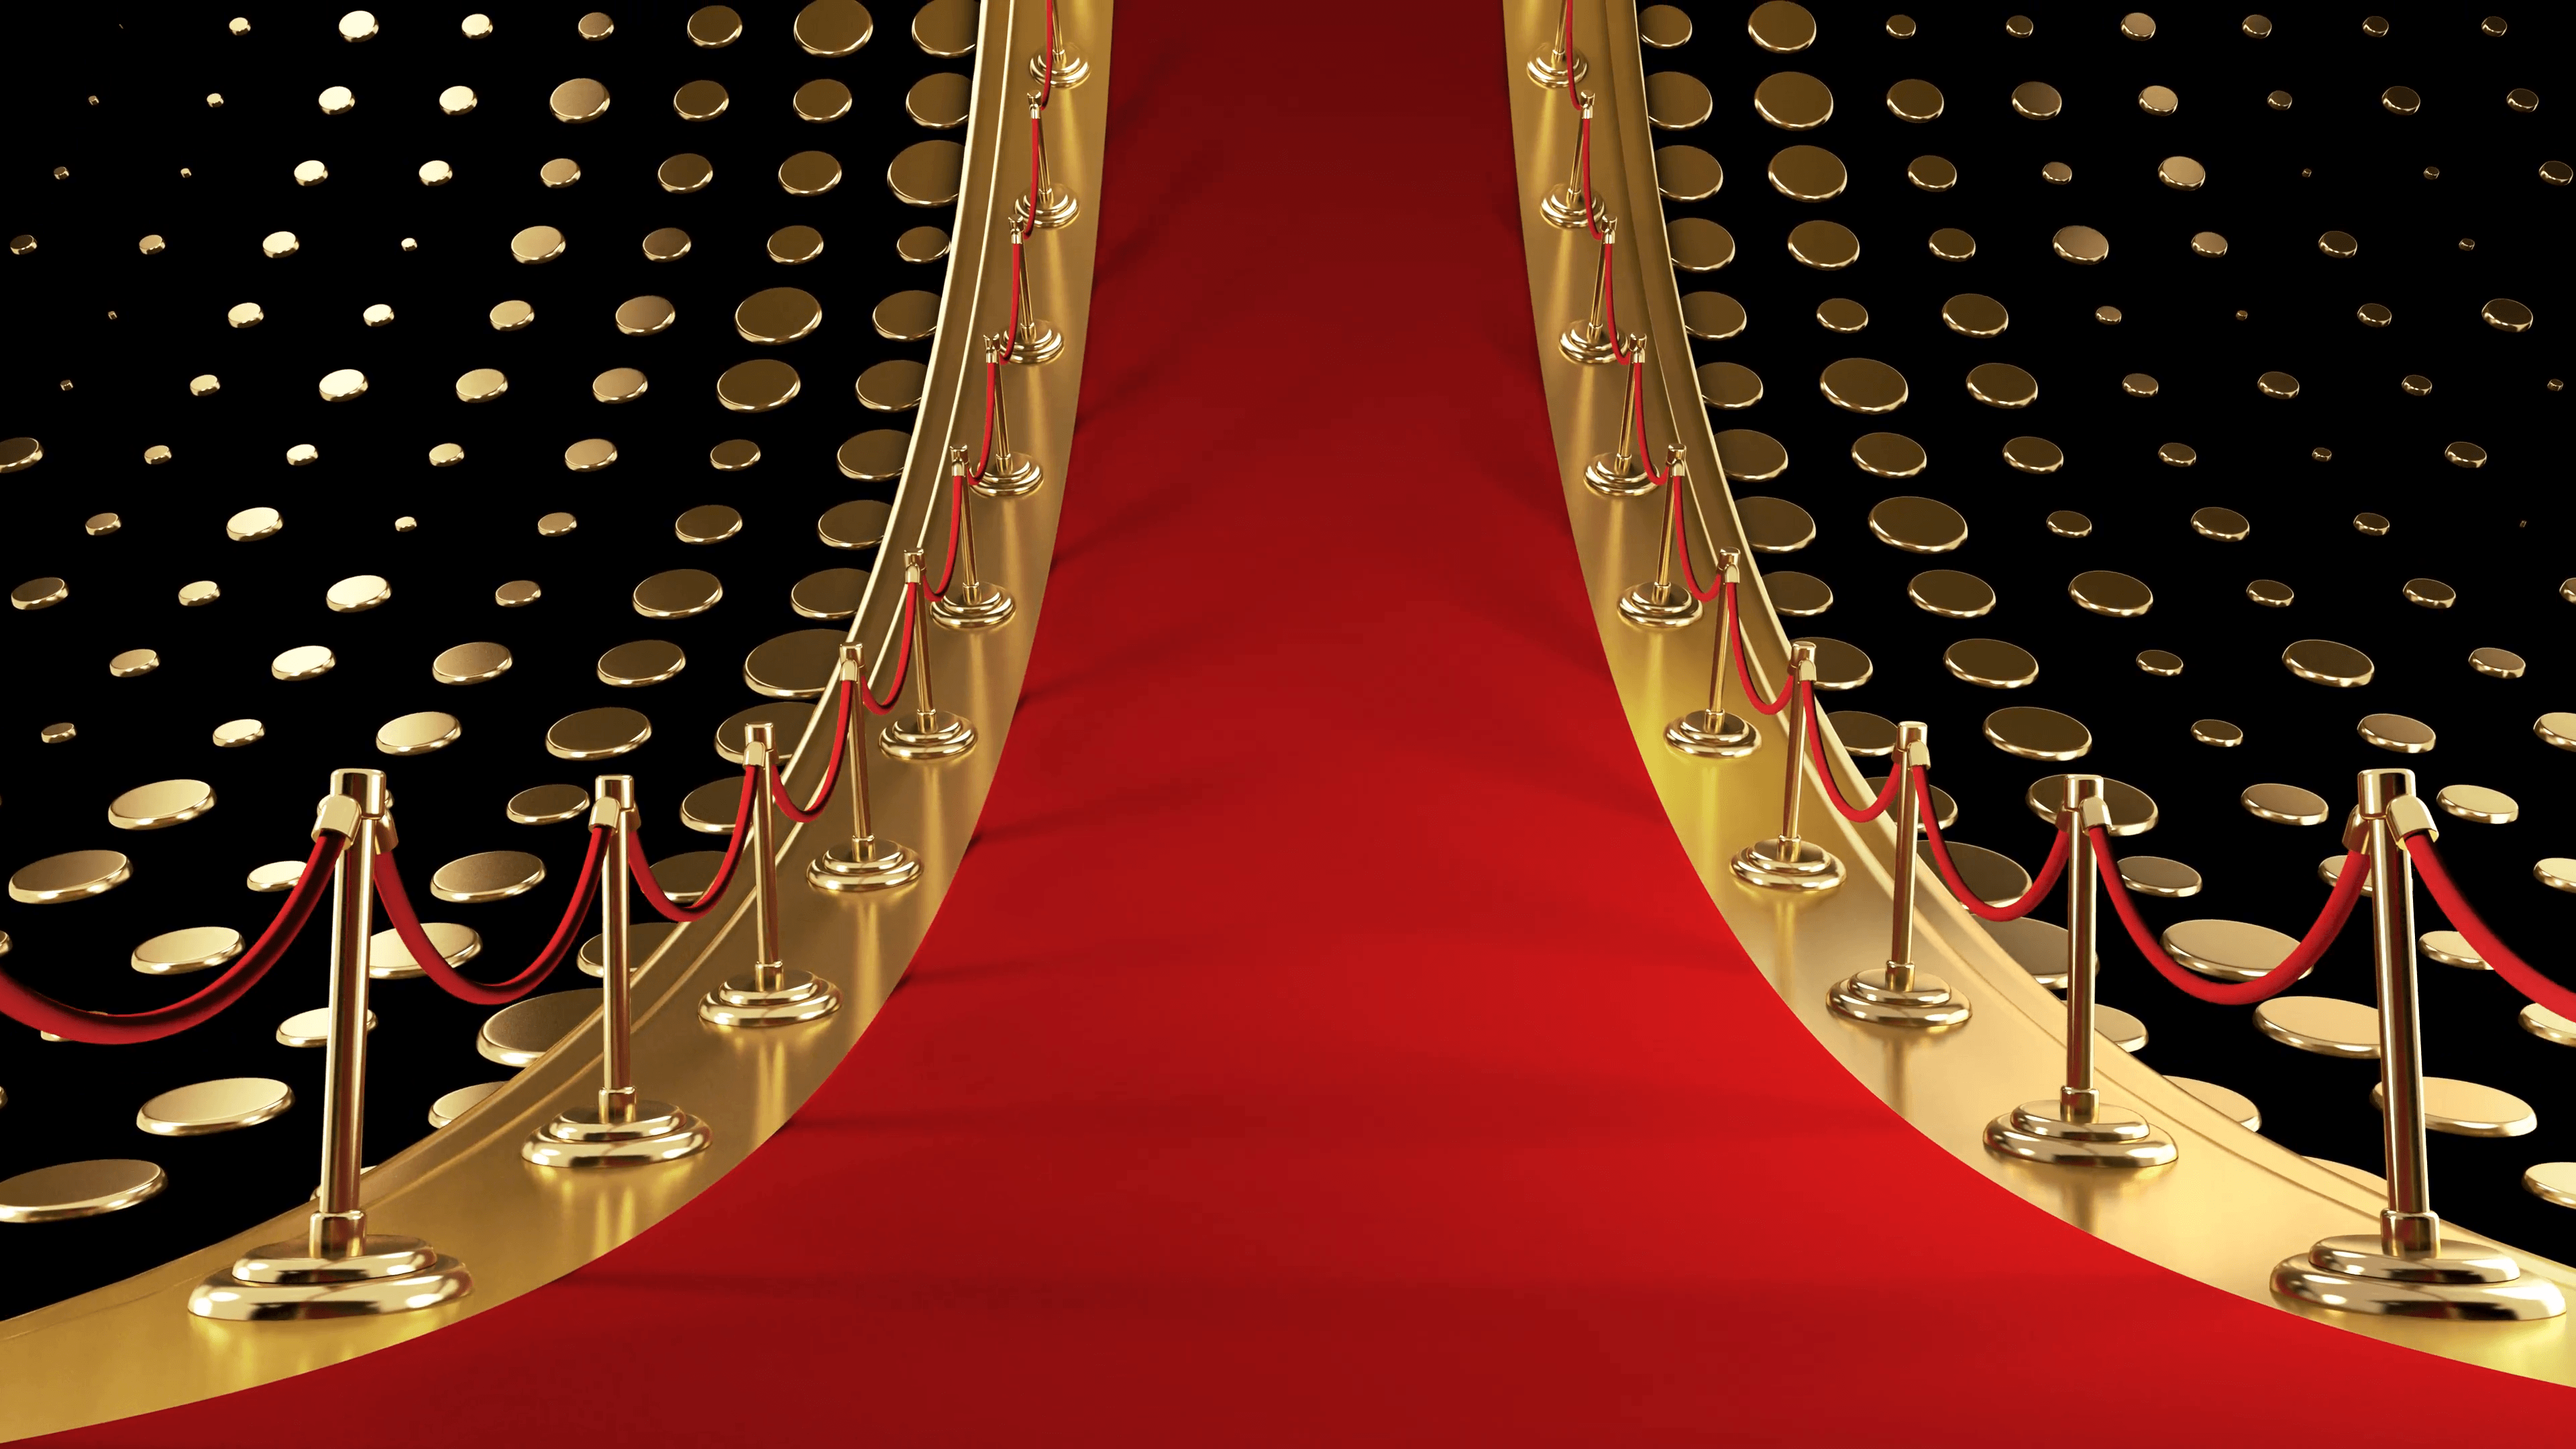 Red Carpet For Fashion Show Background, Pictures Of Red Carpet Background  Image And Wallpaper for Free Download